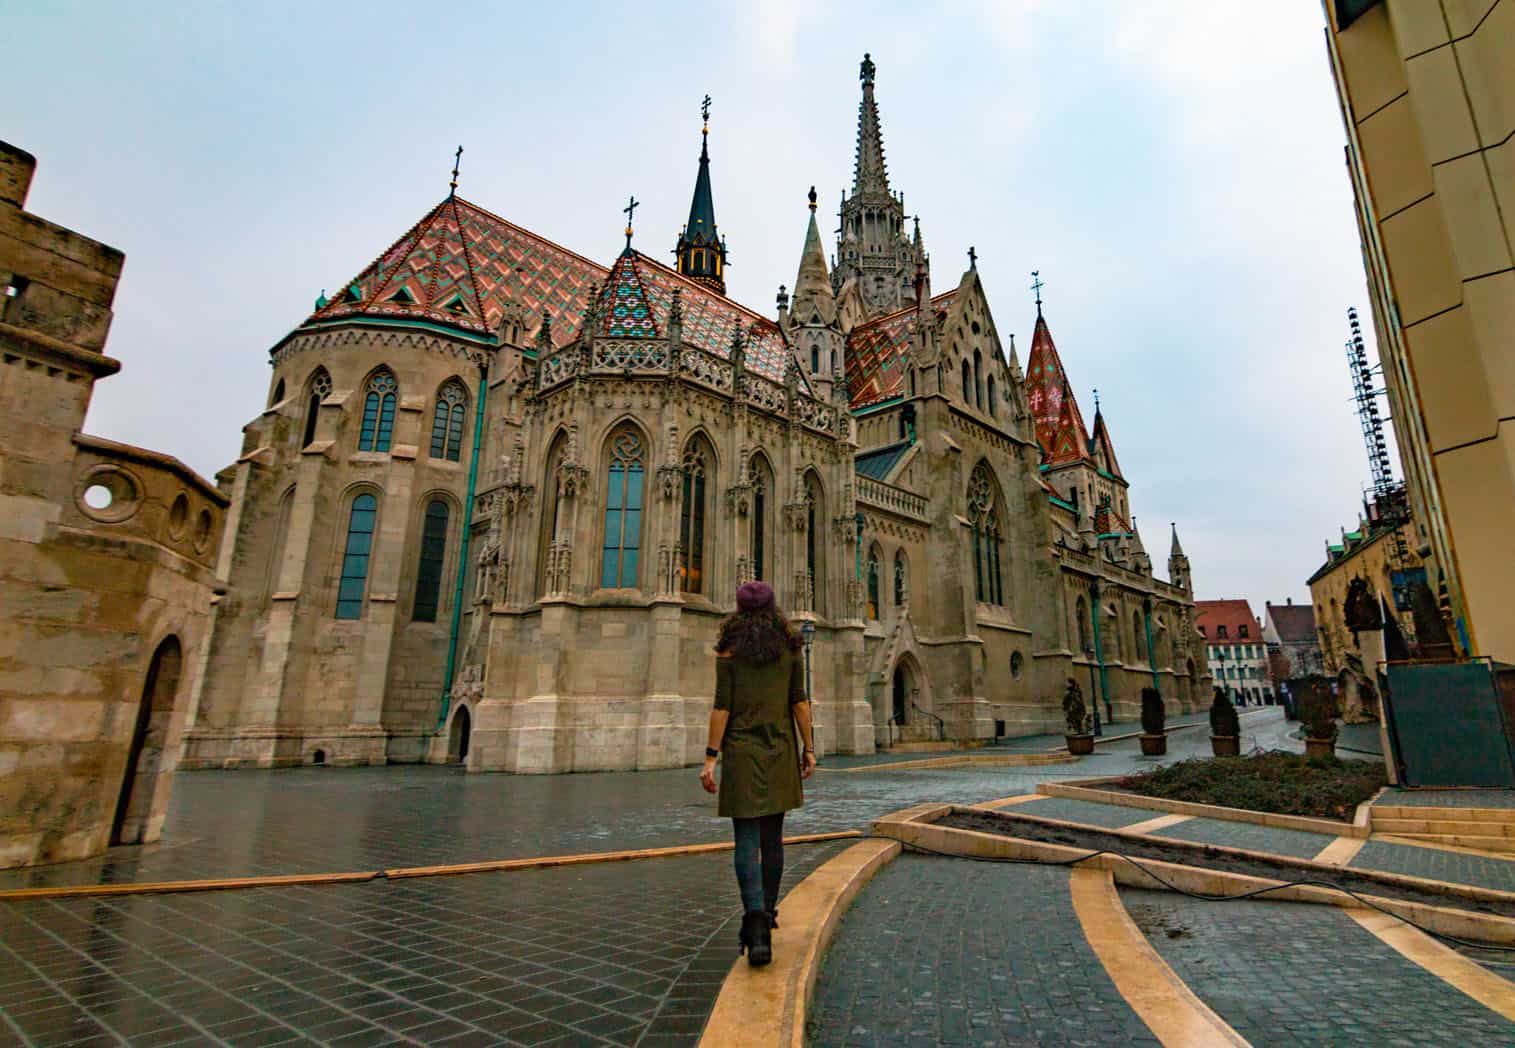 Nina walking through a historic section of Budapest with a huge gothic building in front of her.